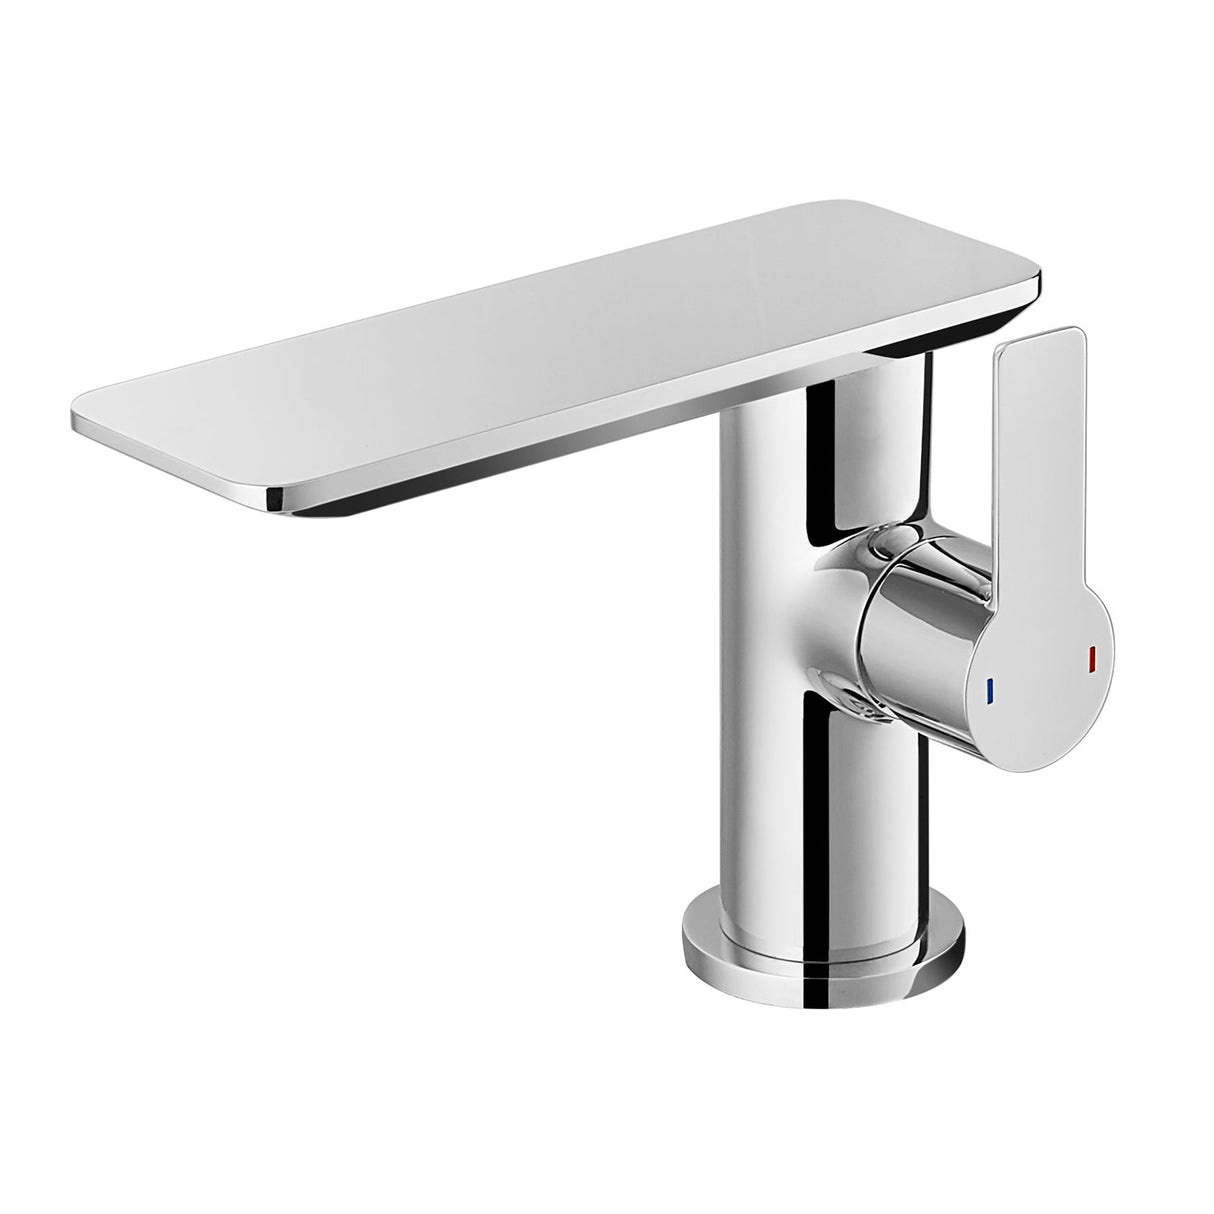 DAX Brass Single Handle Bathroom Waterfall Faucet Spout, 16", Brushed Nickel DAX-8205-BN